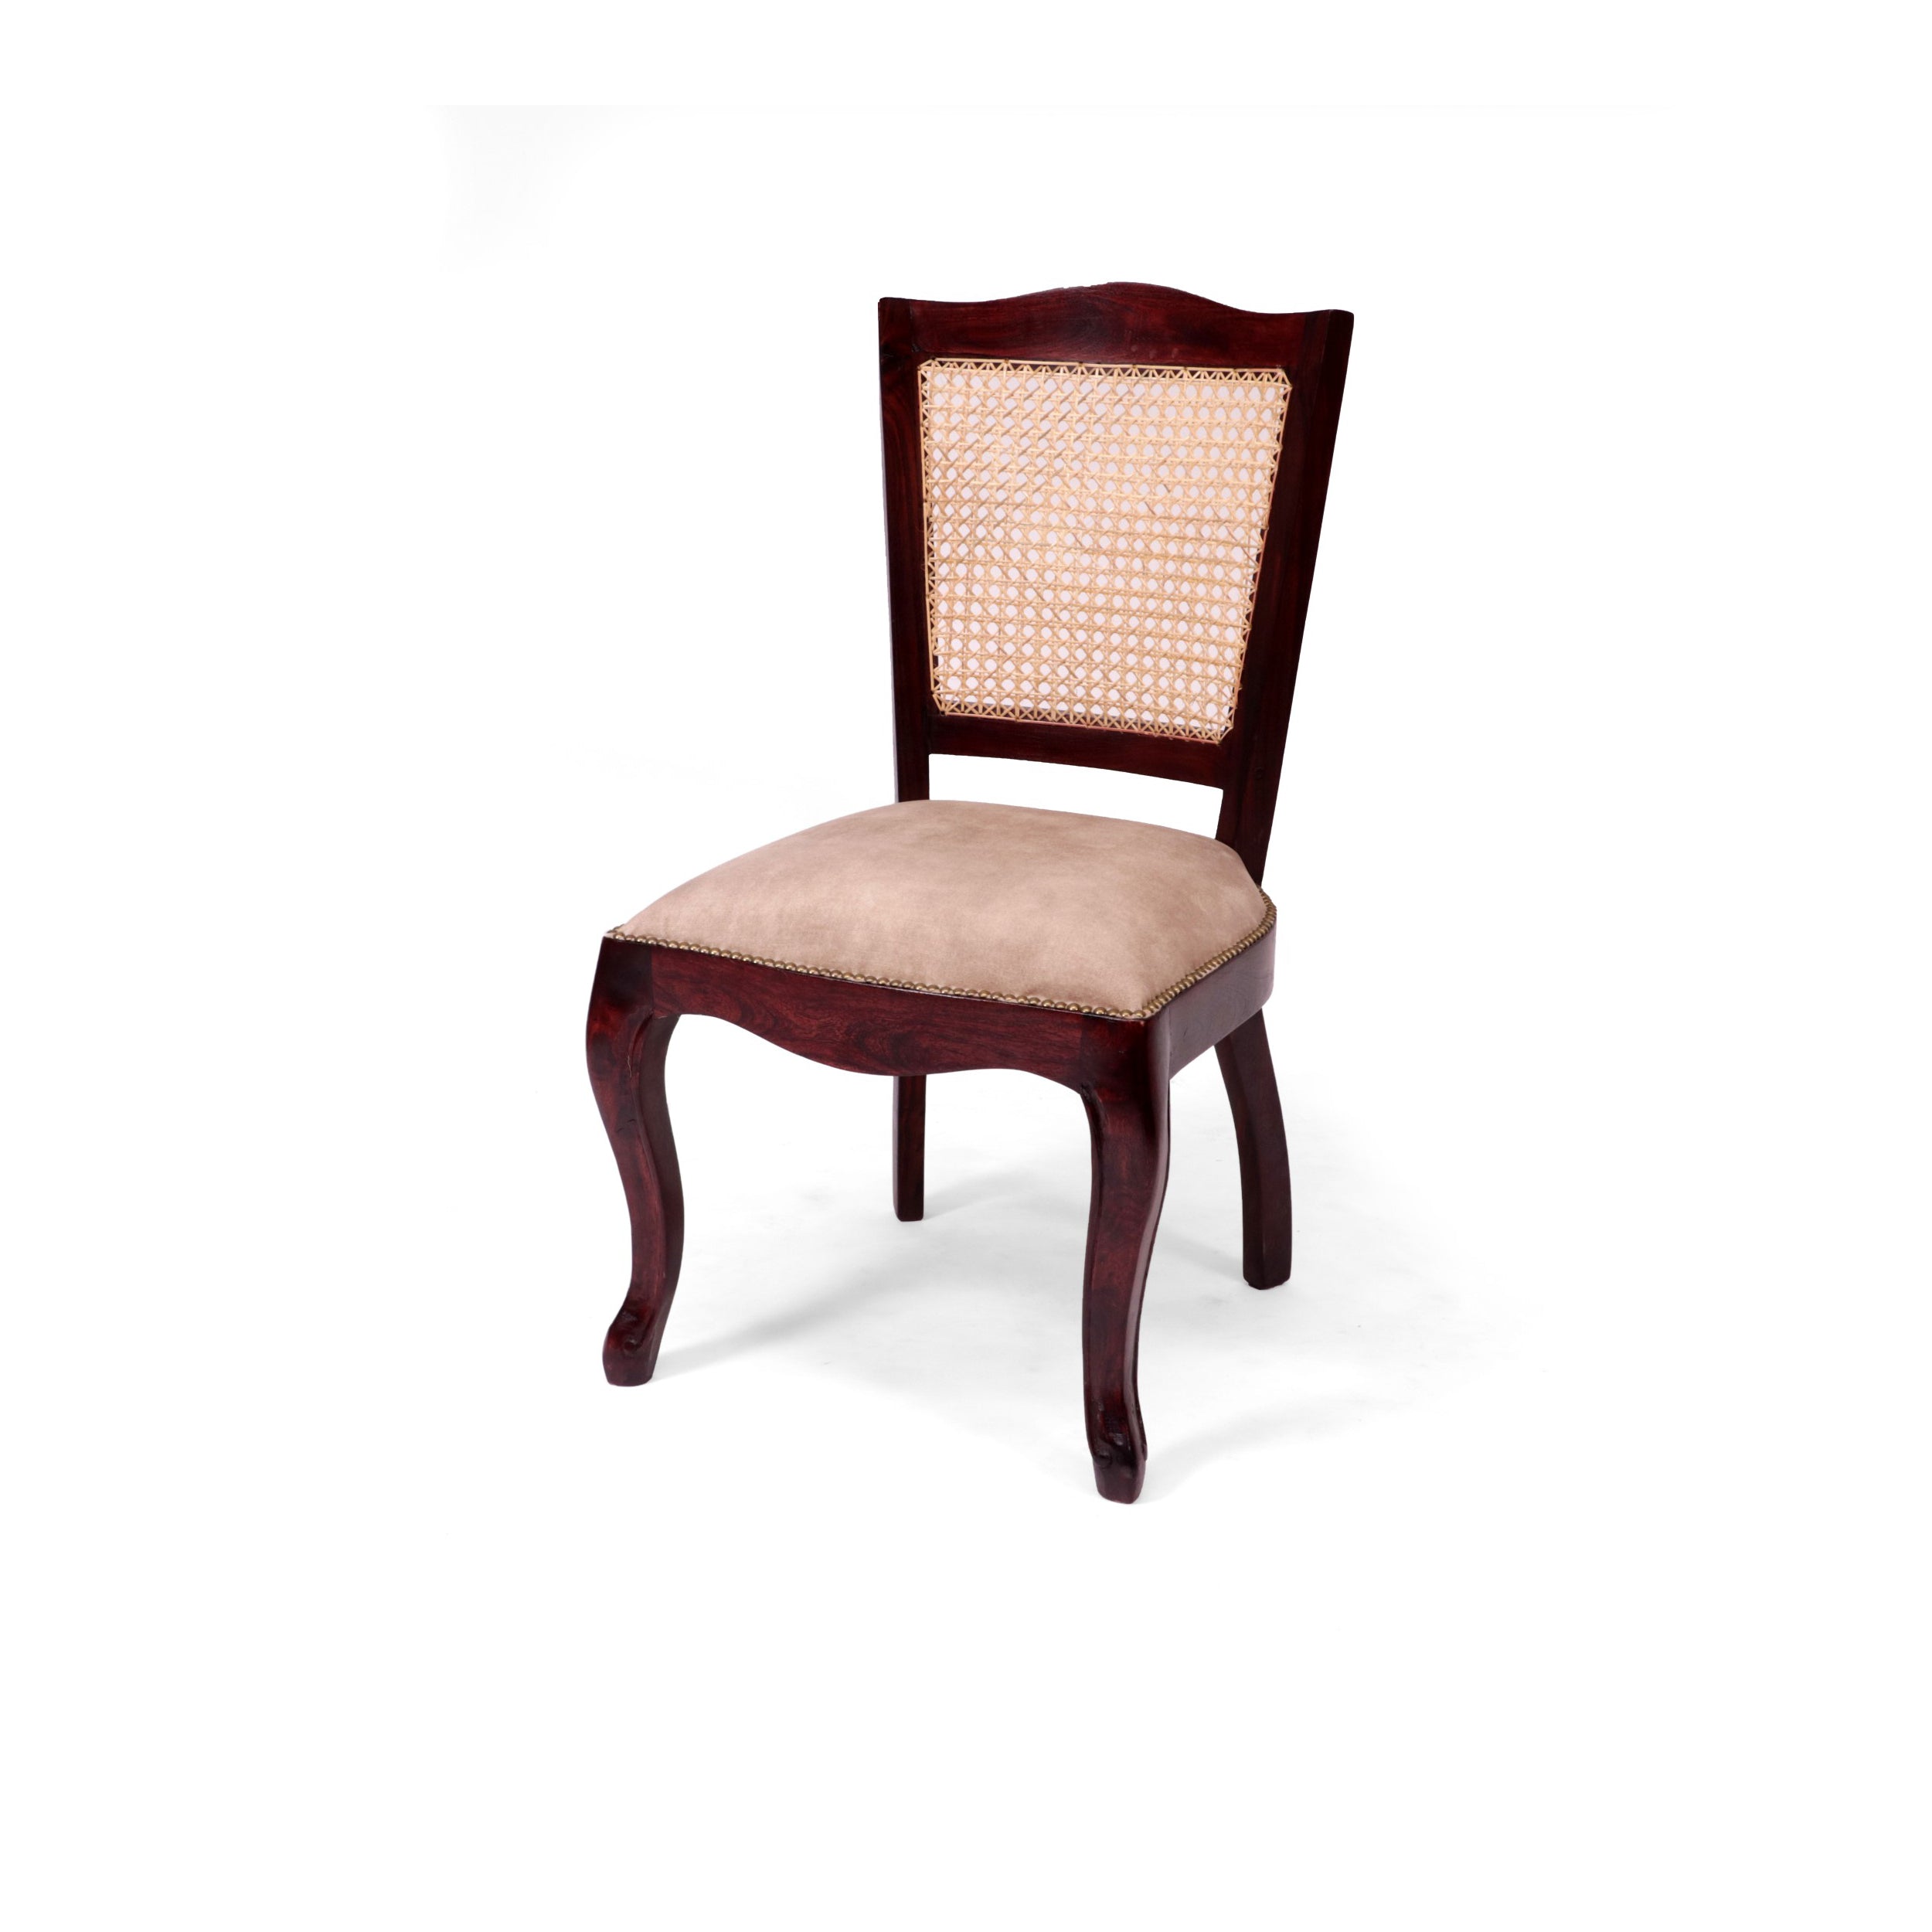 (Set of 2) Stylish Cane back Wooden Chair Dining Chair